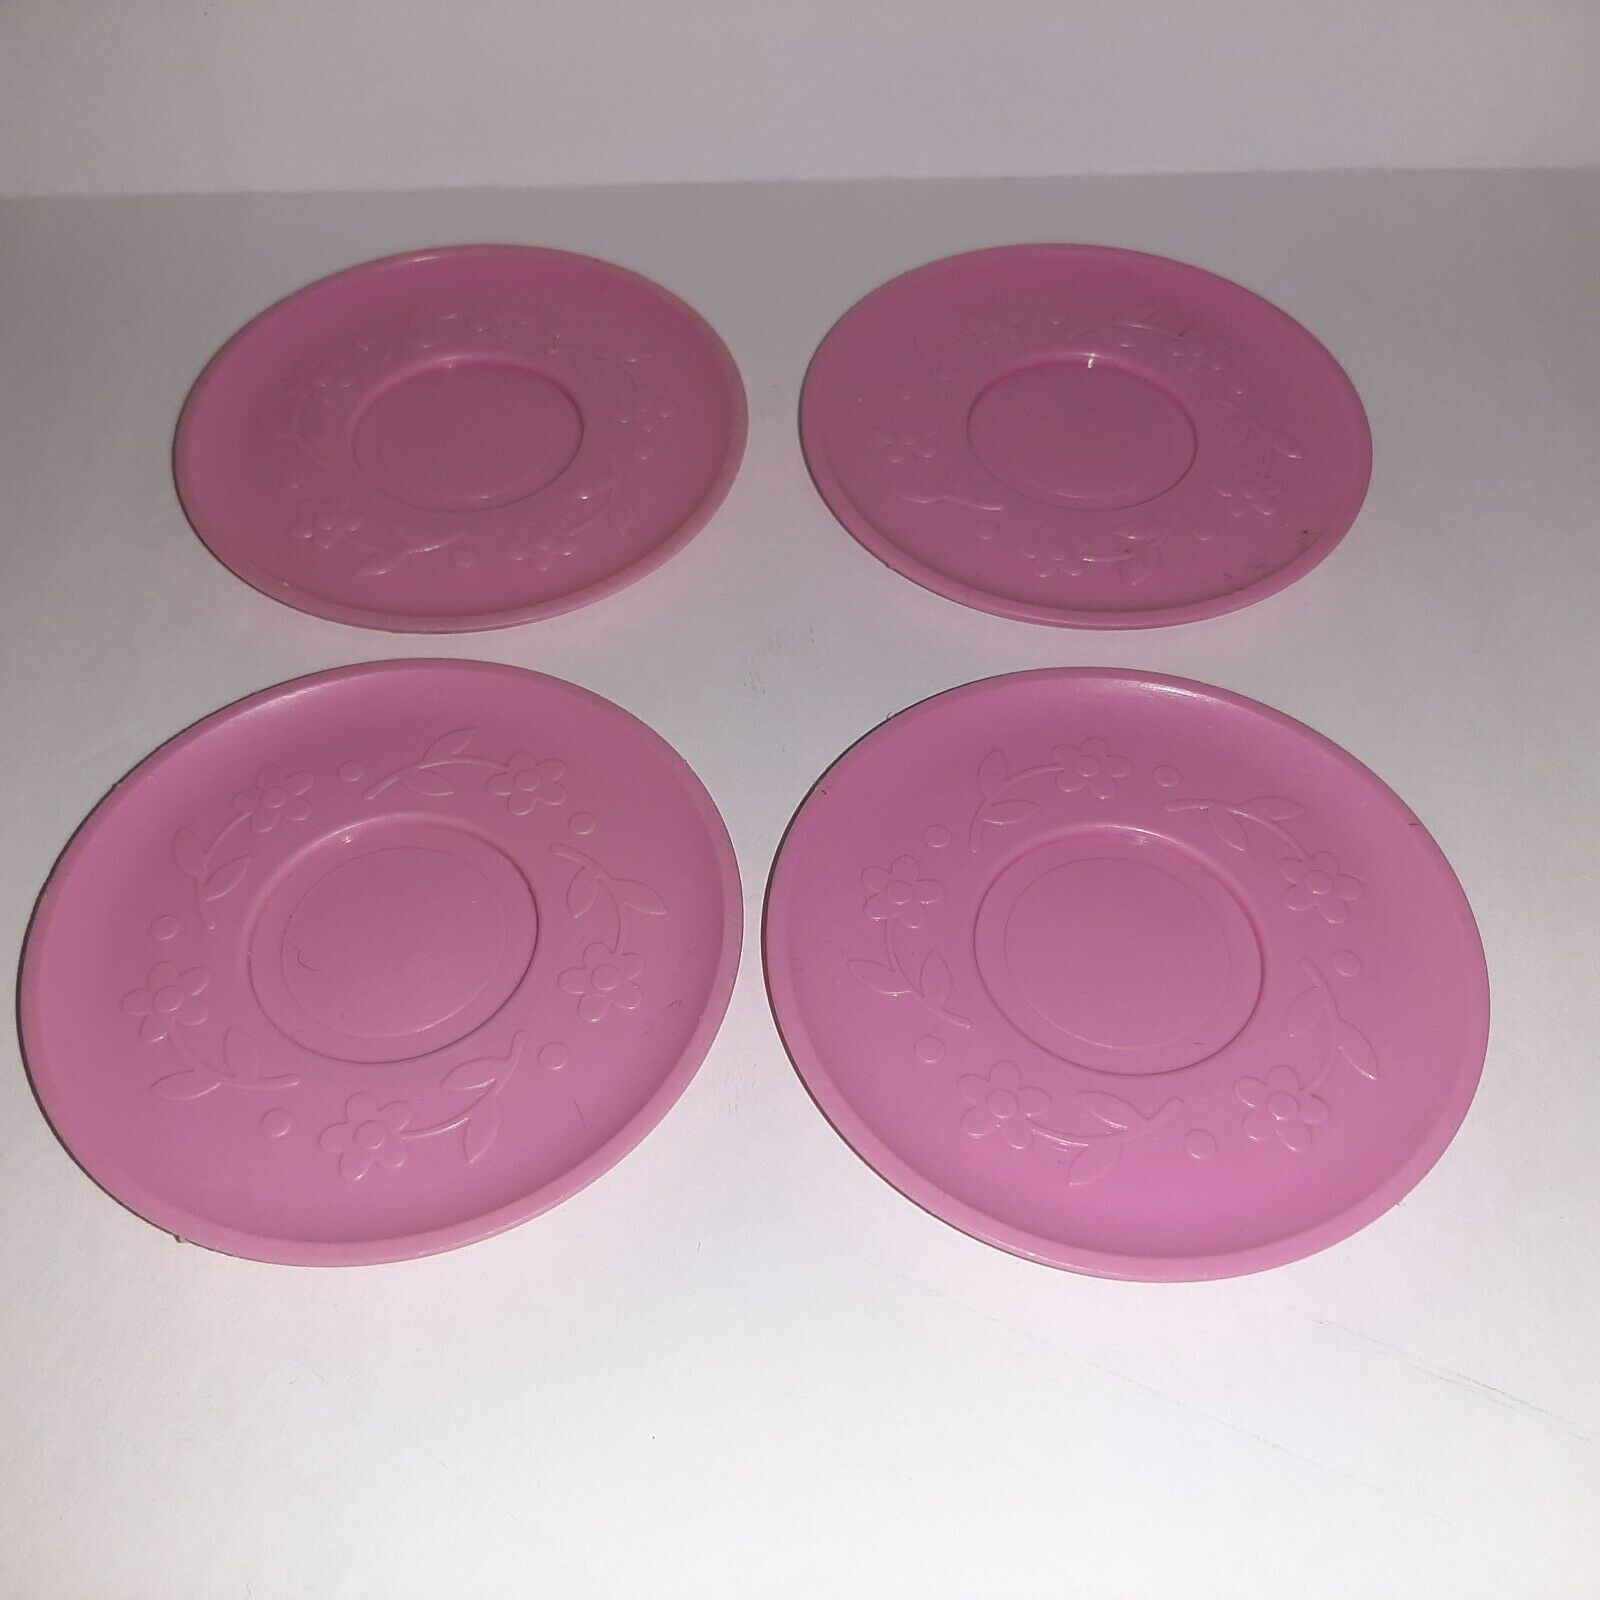 1982 Fun Food Fisher Price Pink Tea Cup & Purple Saucer w/ Spoon Replacements 